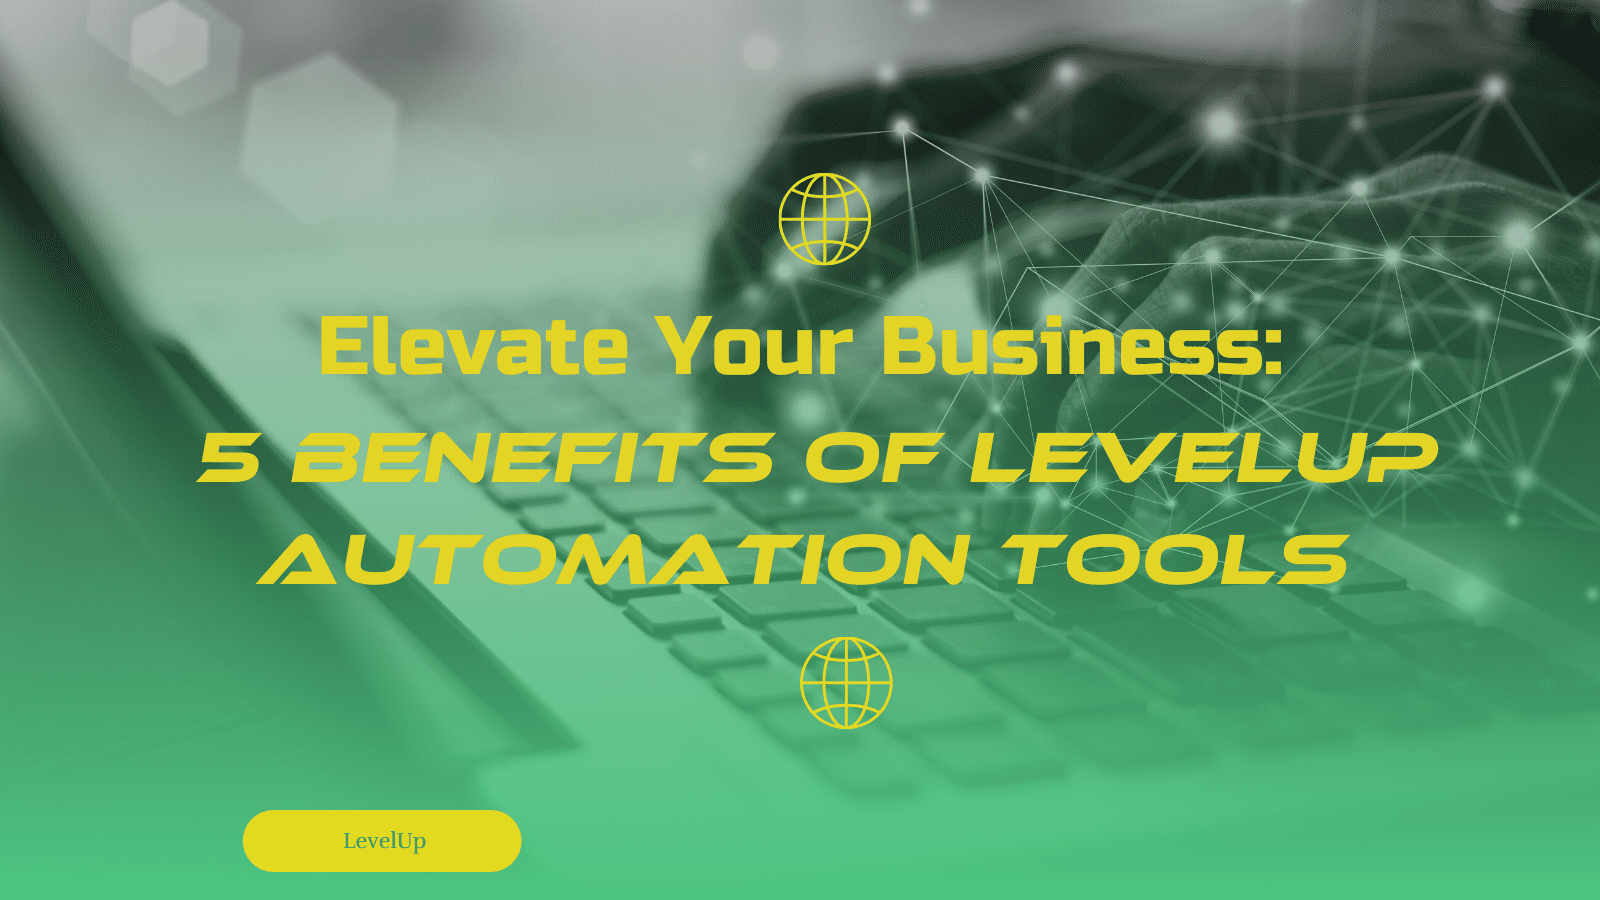 Illustration featuring the title 'Elevate Your Business: 5 Benefits of LevelUp Automation Tools' to emphasize the advantages of automation tools in enhancing business operations.